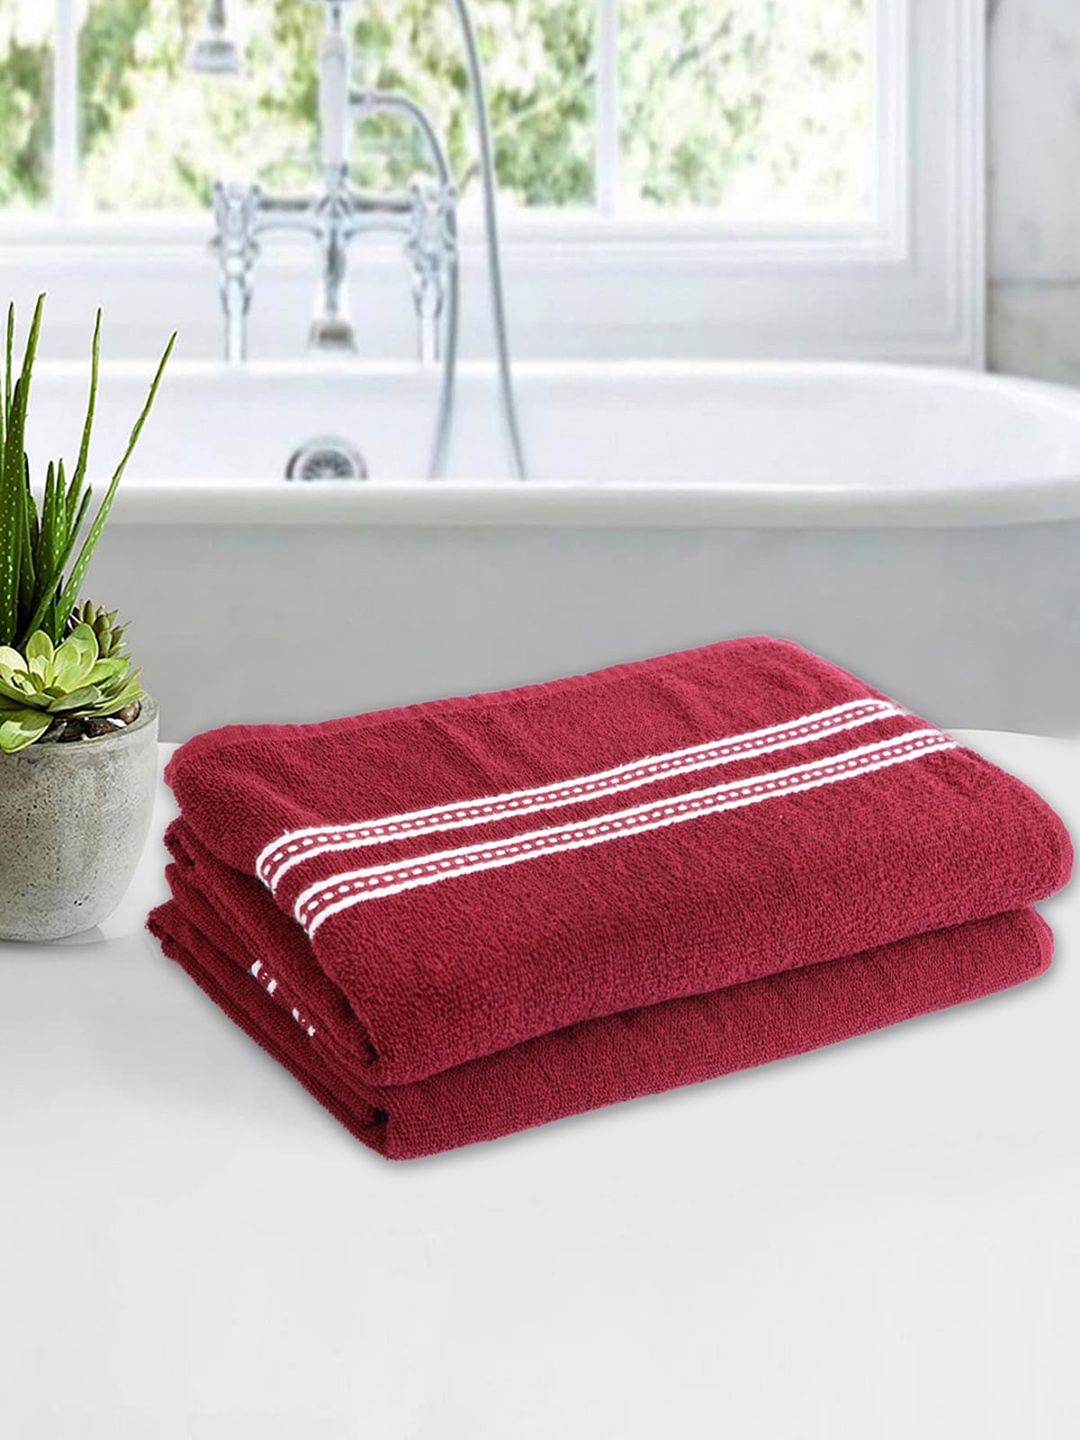 ROMEE  Set of 2 Burgundy Absorbent & Soft Cotton Bath Towels GSM 500 Price in India